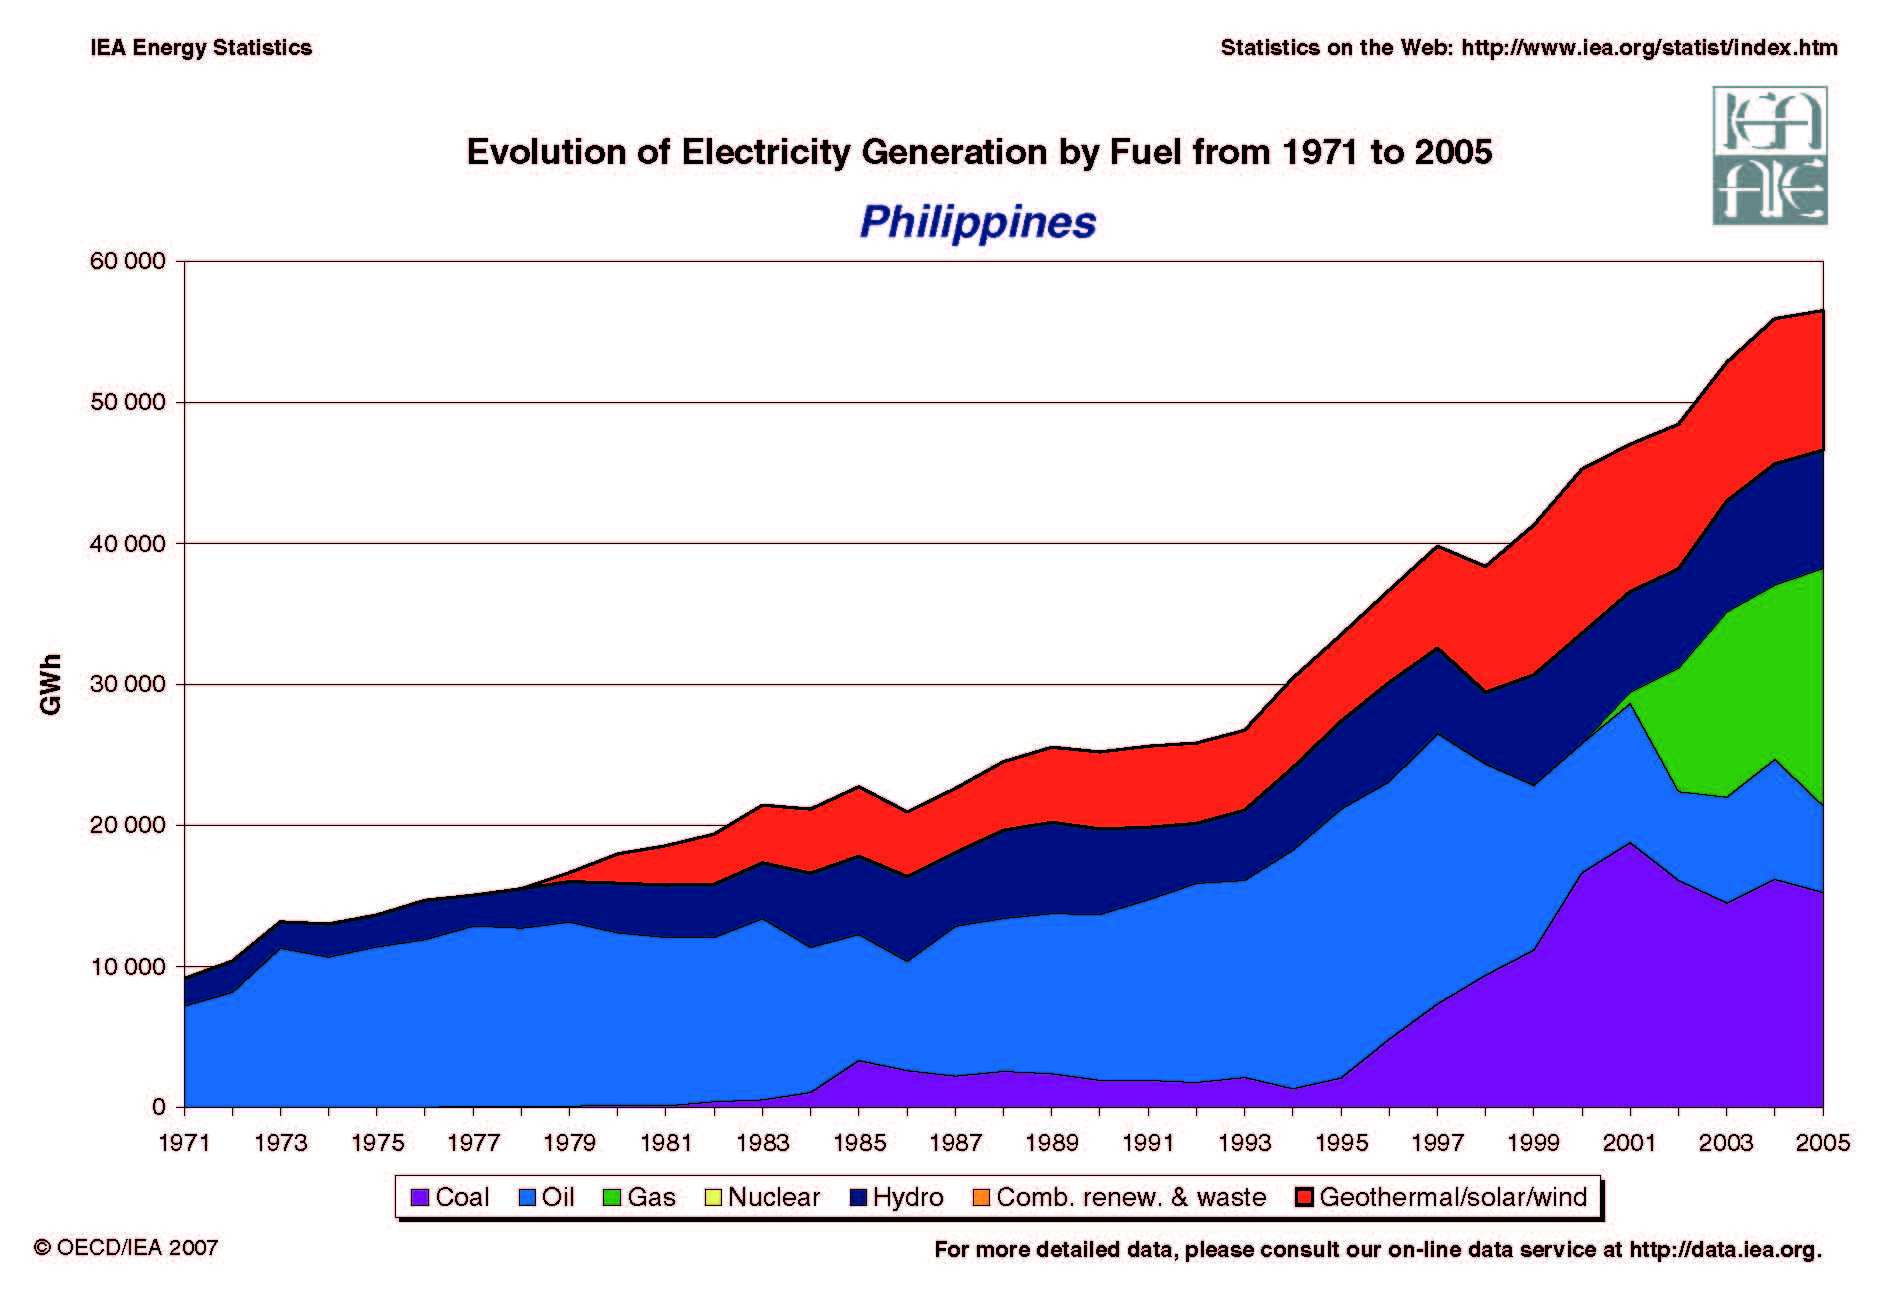 Philippines Evolution of Electricity Generation by Fuel 1971 - 2005